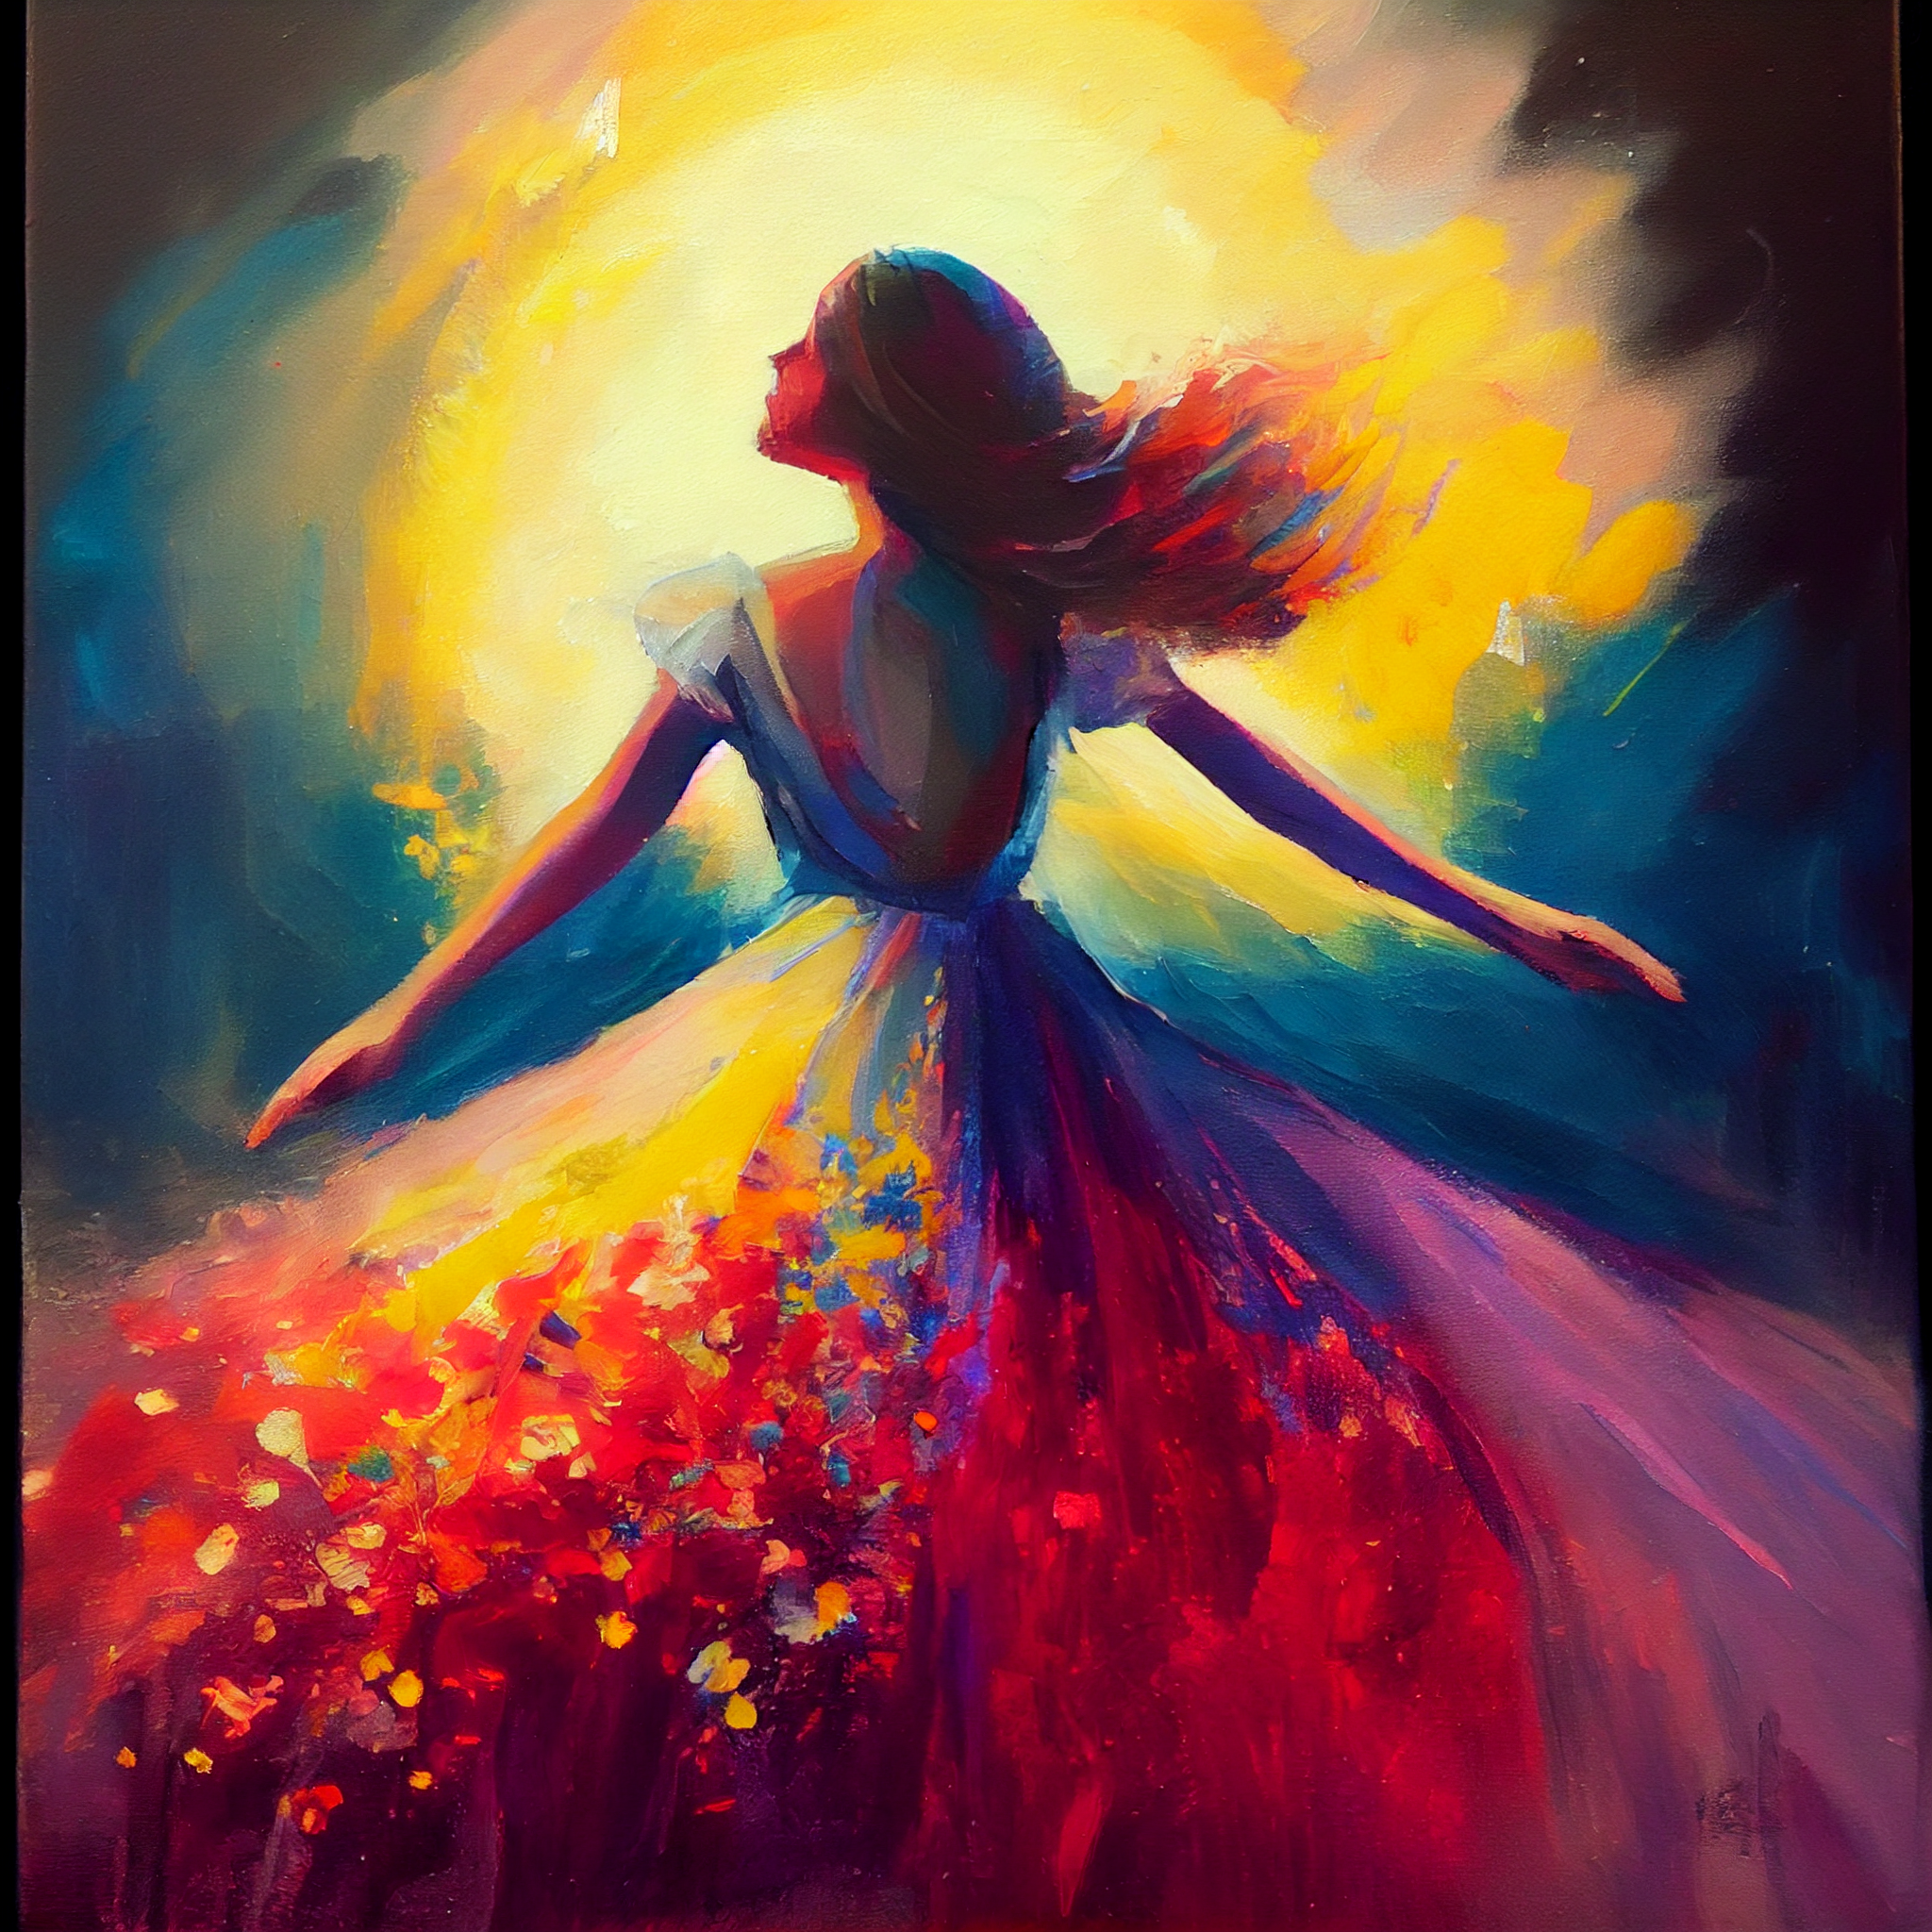 Dancing in the Sun: Oil Painting Print of Girl in Multicolored Gown